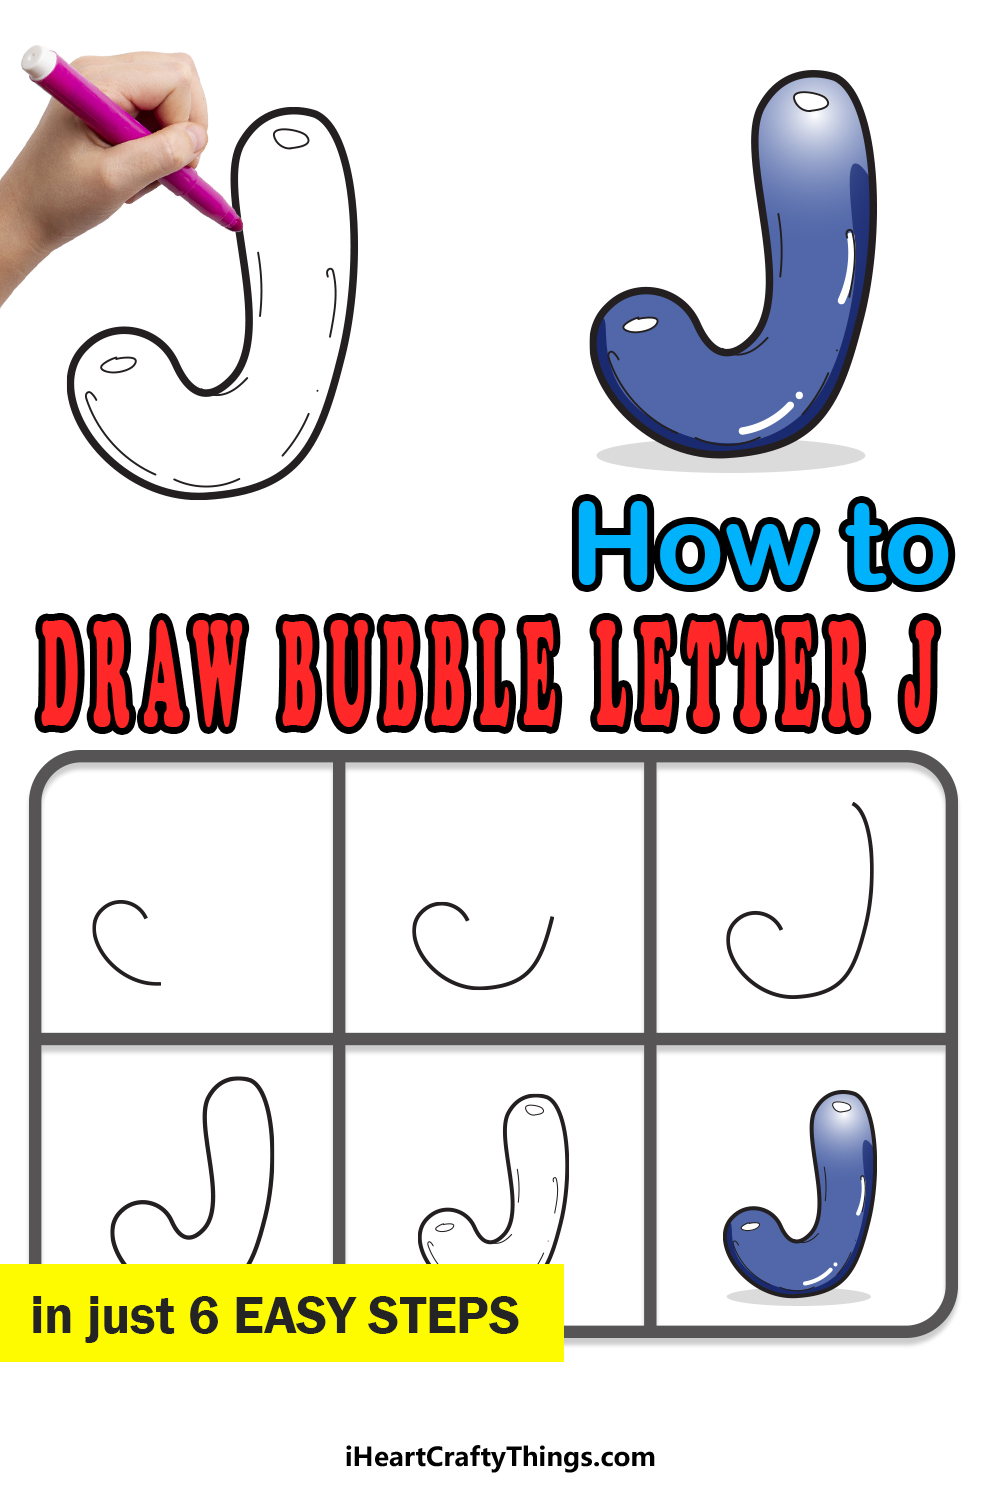 How To Draw Your Own Bubble J step by step guide